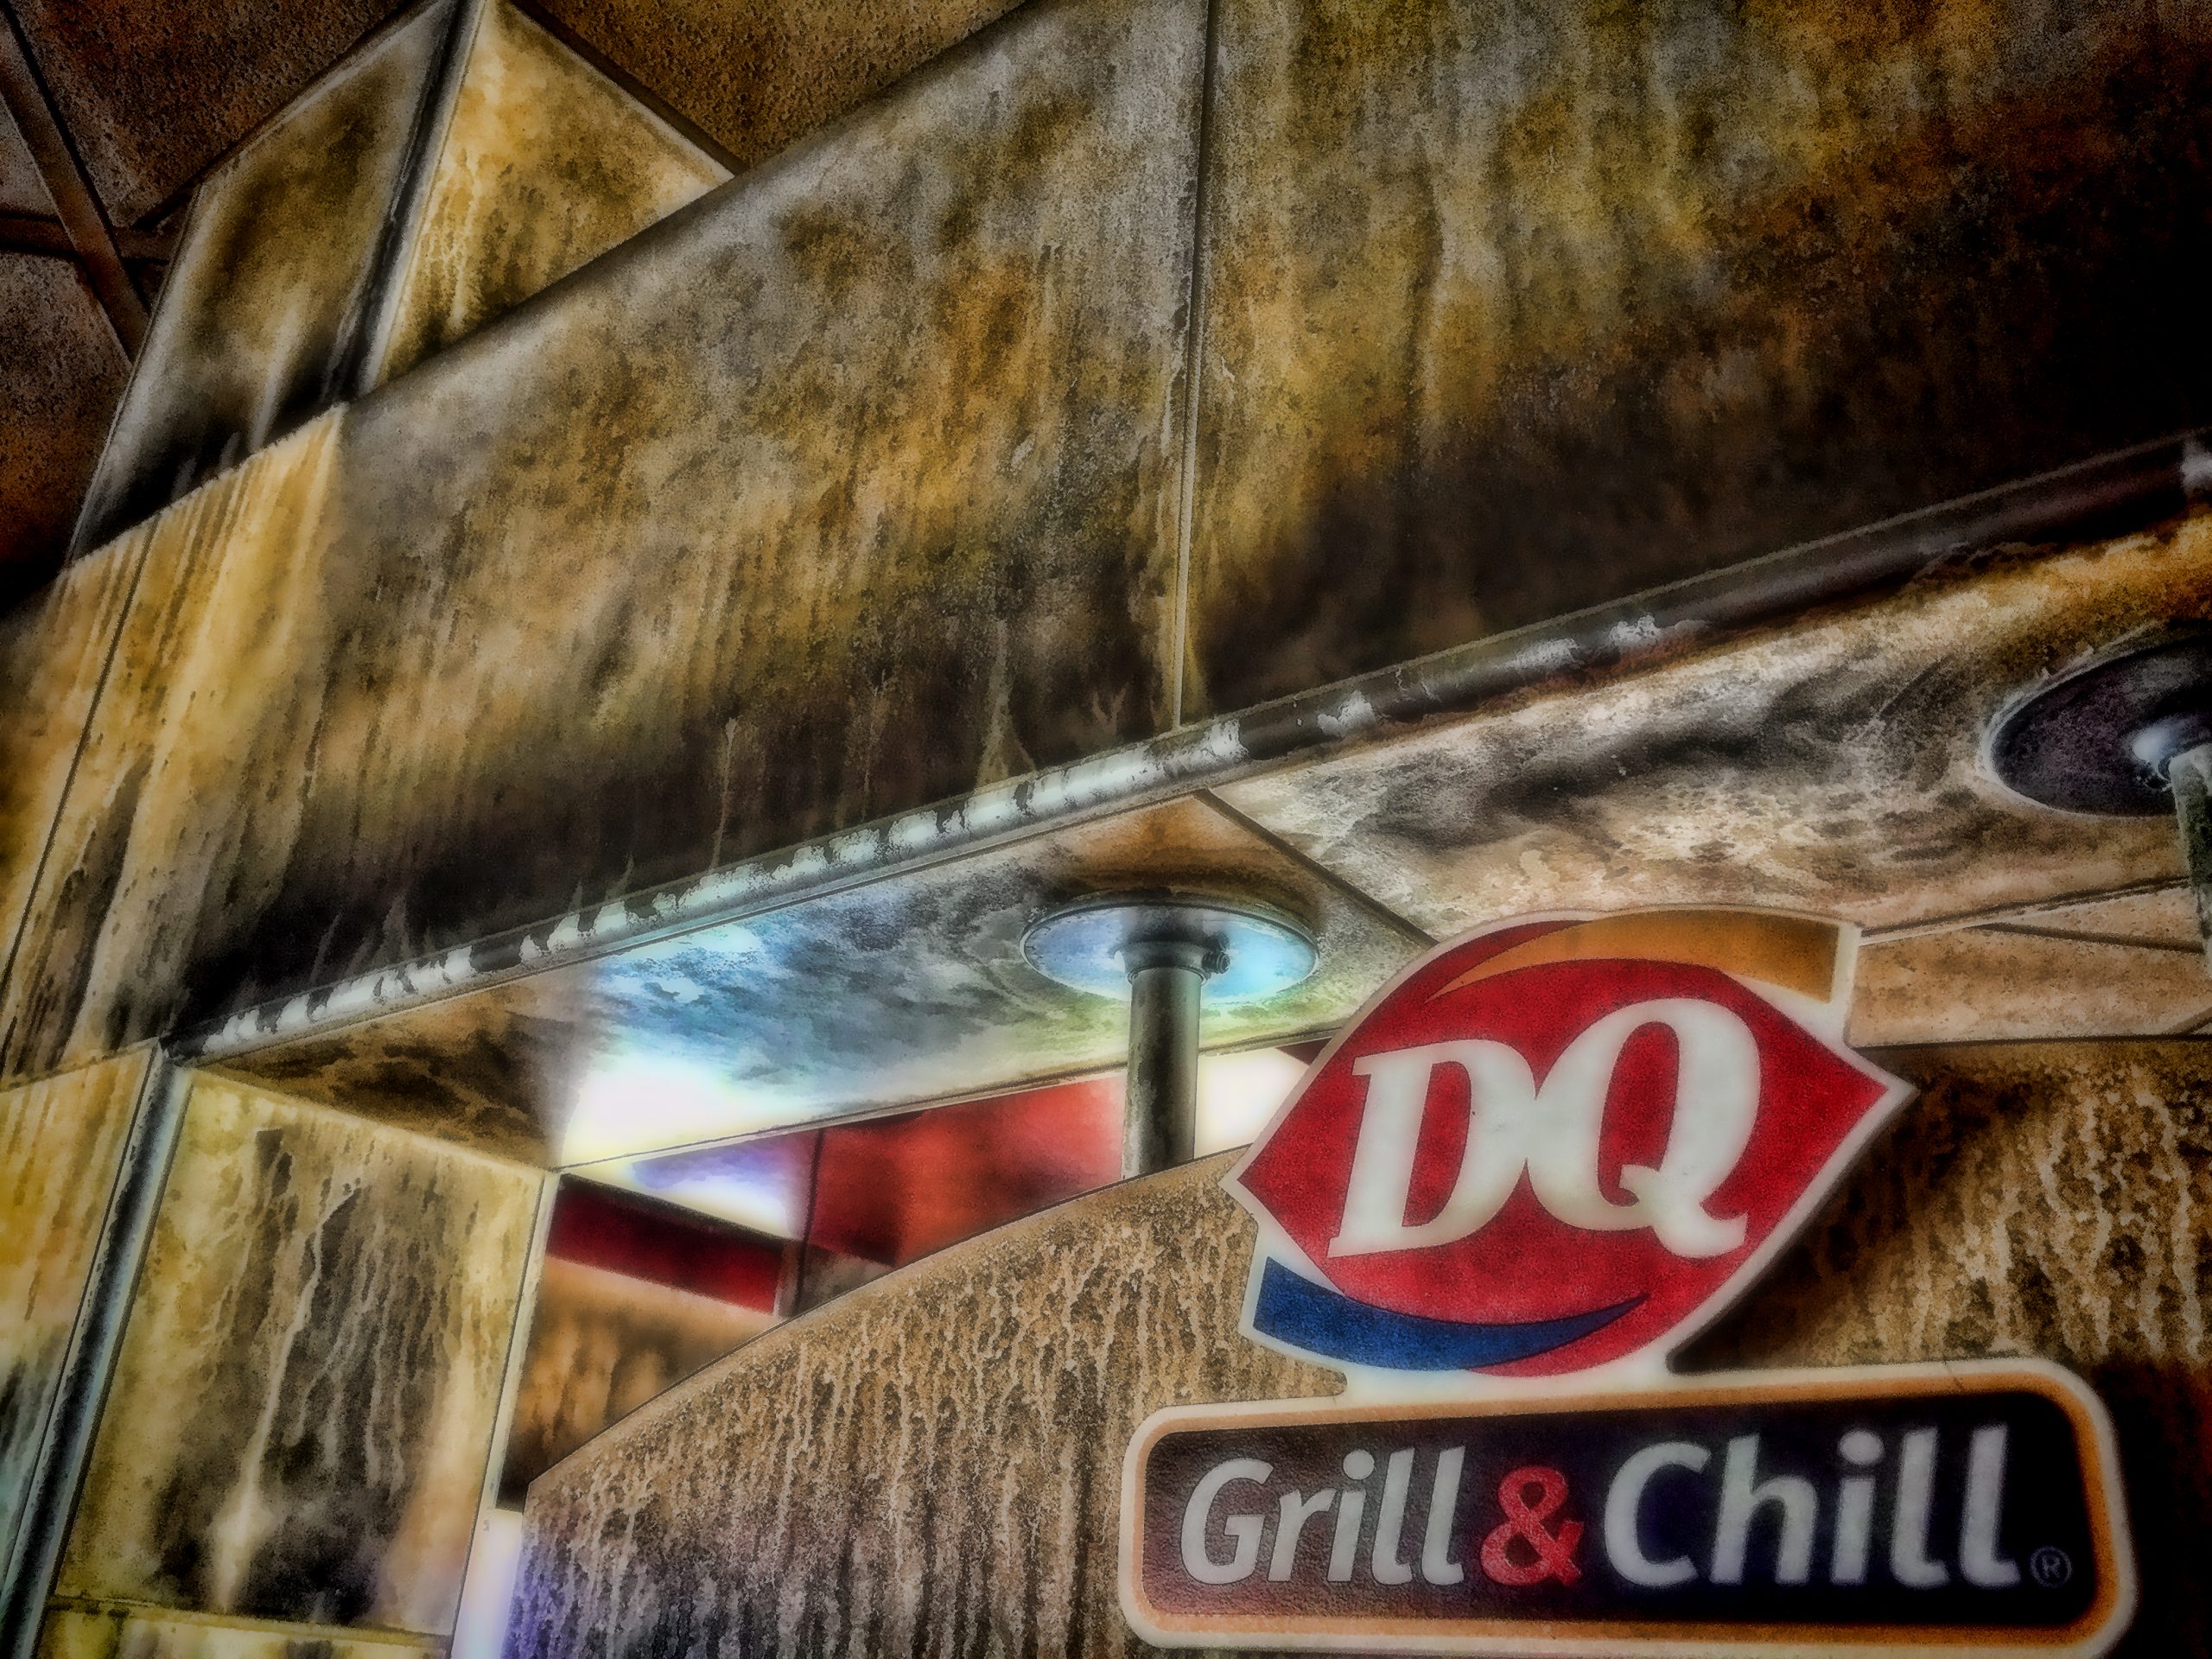 Dairy Queen Fire Cause Ruled Accidental, Spontaneous Combustion